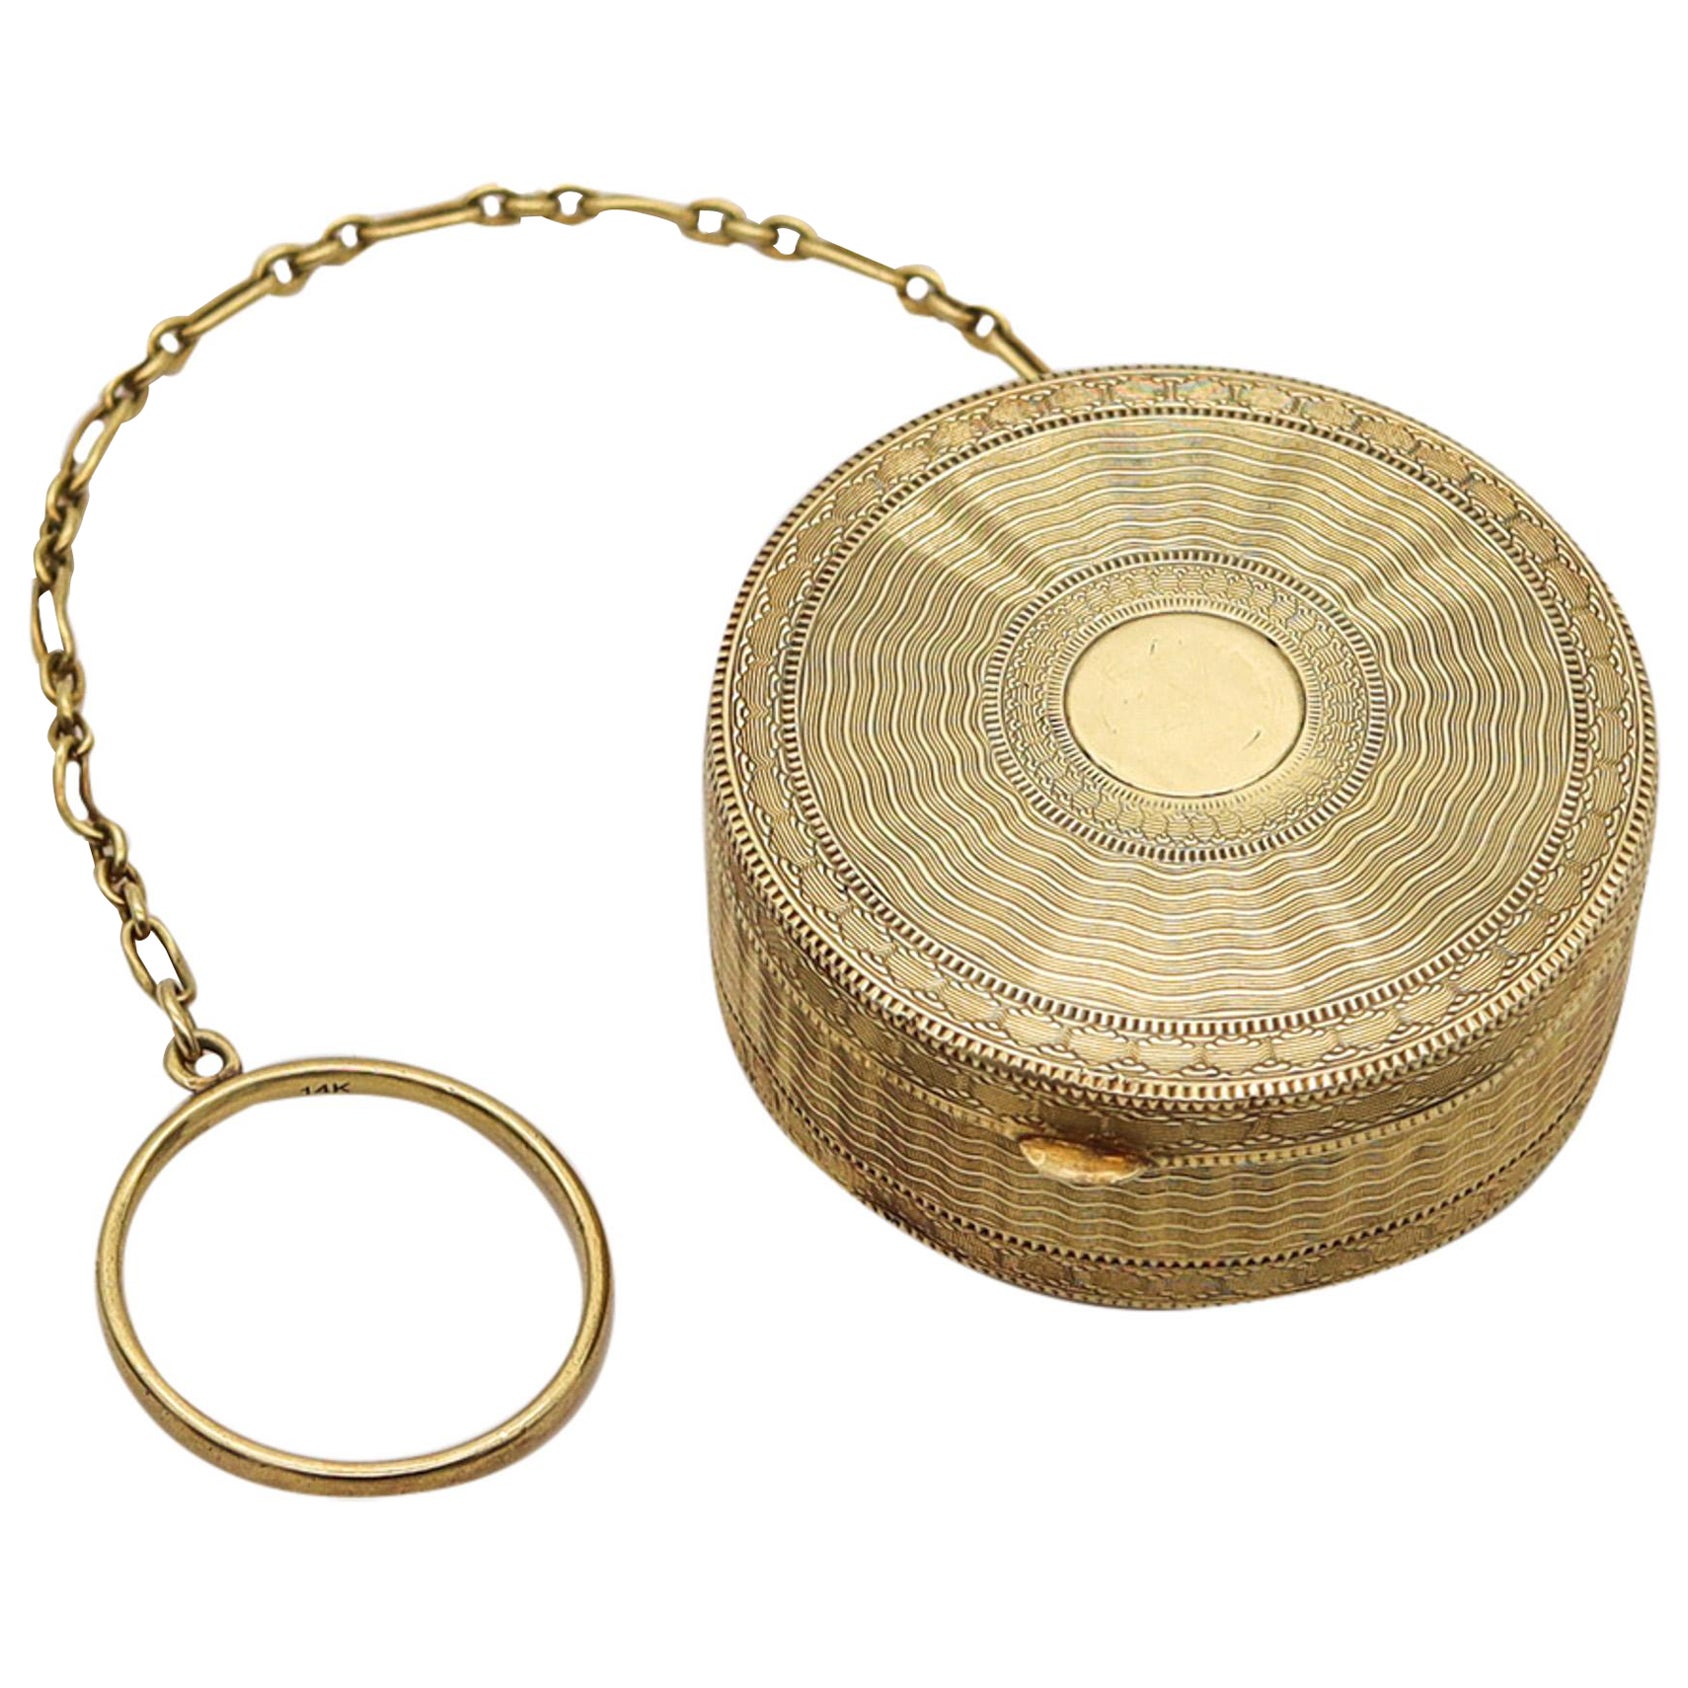 Tiffany & Co. 1910 Edwardian Guilloché Round Pill Box In 14Kt Yellow Gold